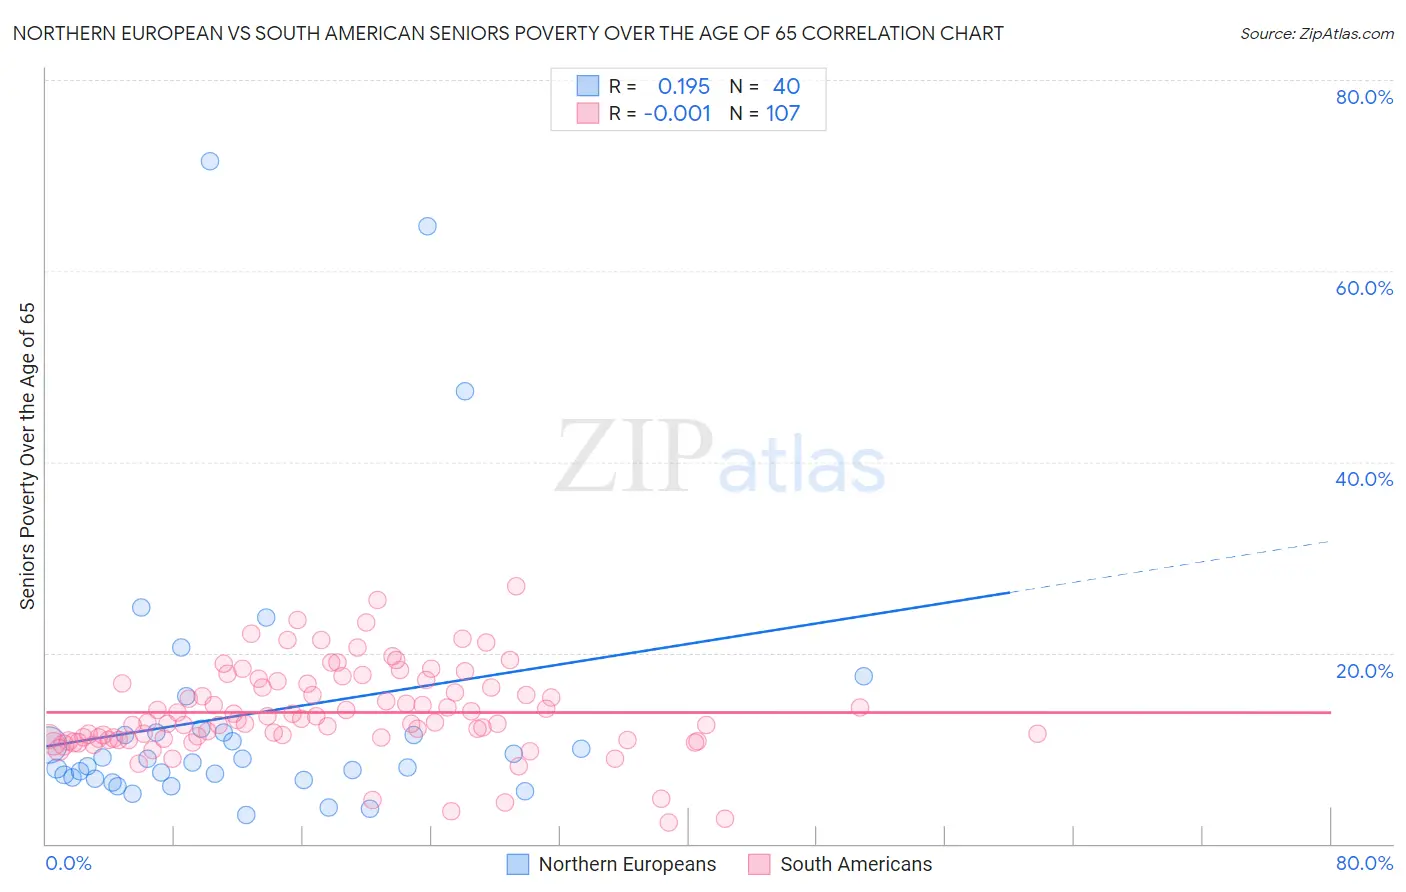 Northern European vs South American Seniors Poverty Over the Age of 65